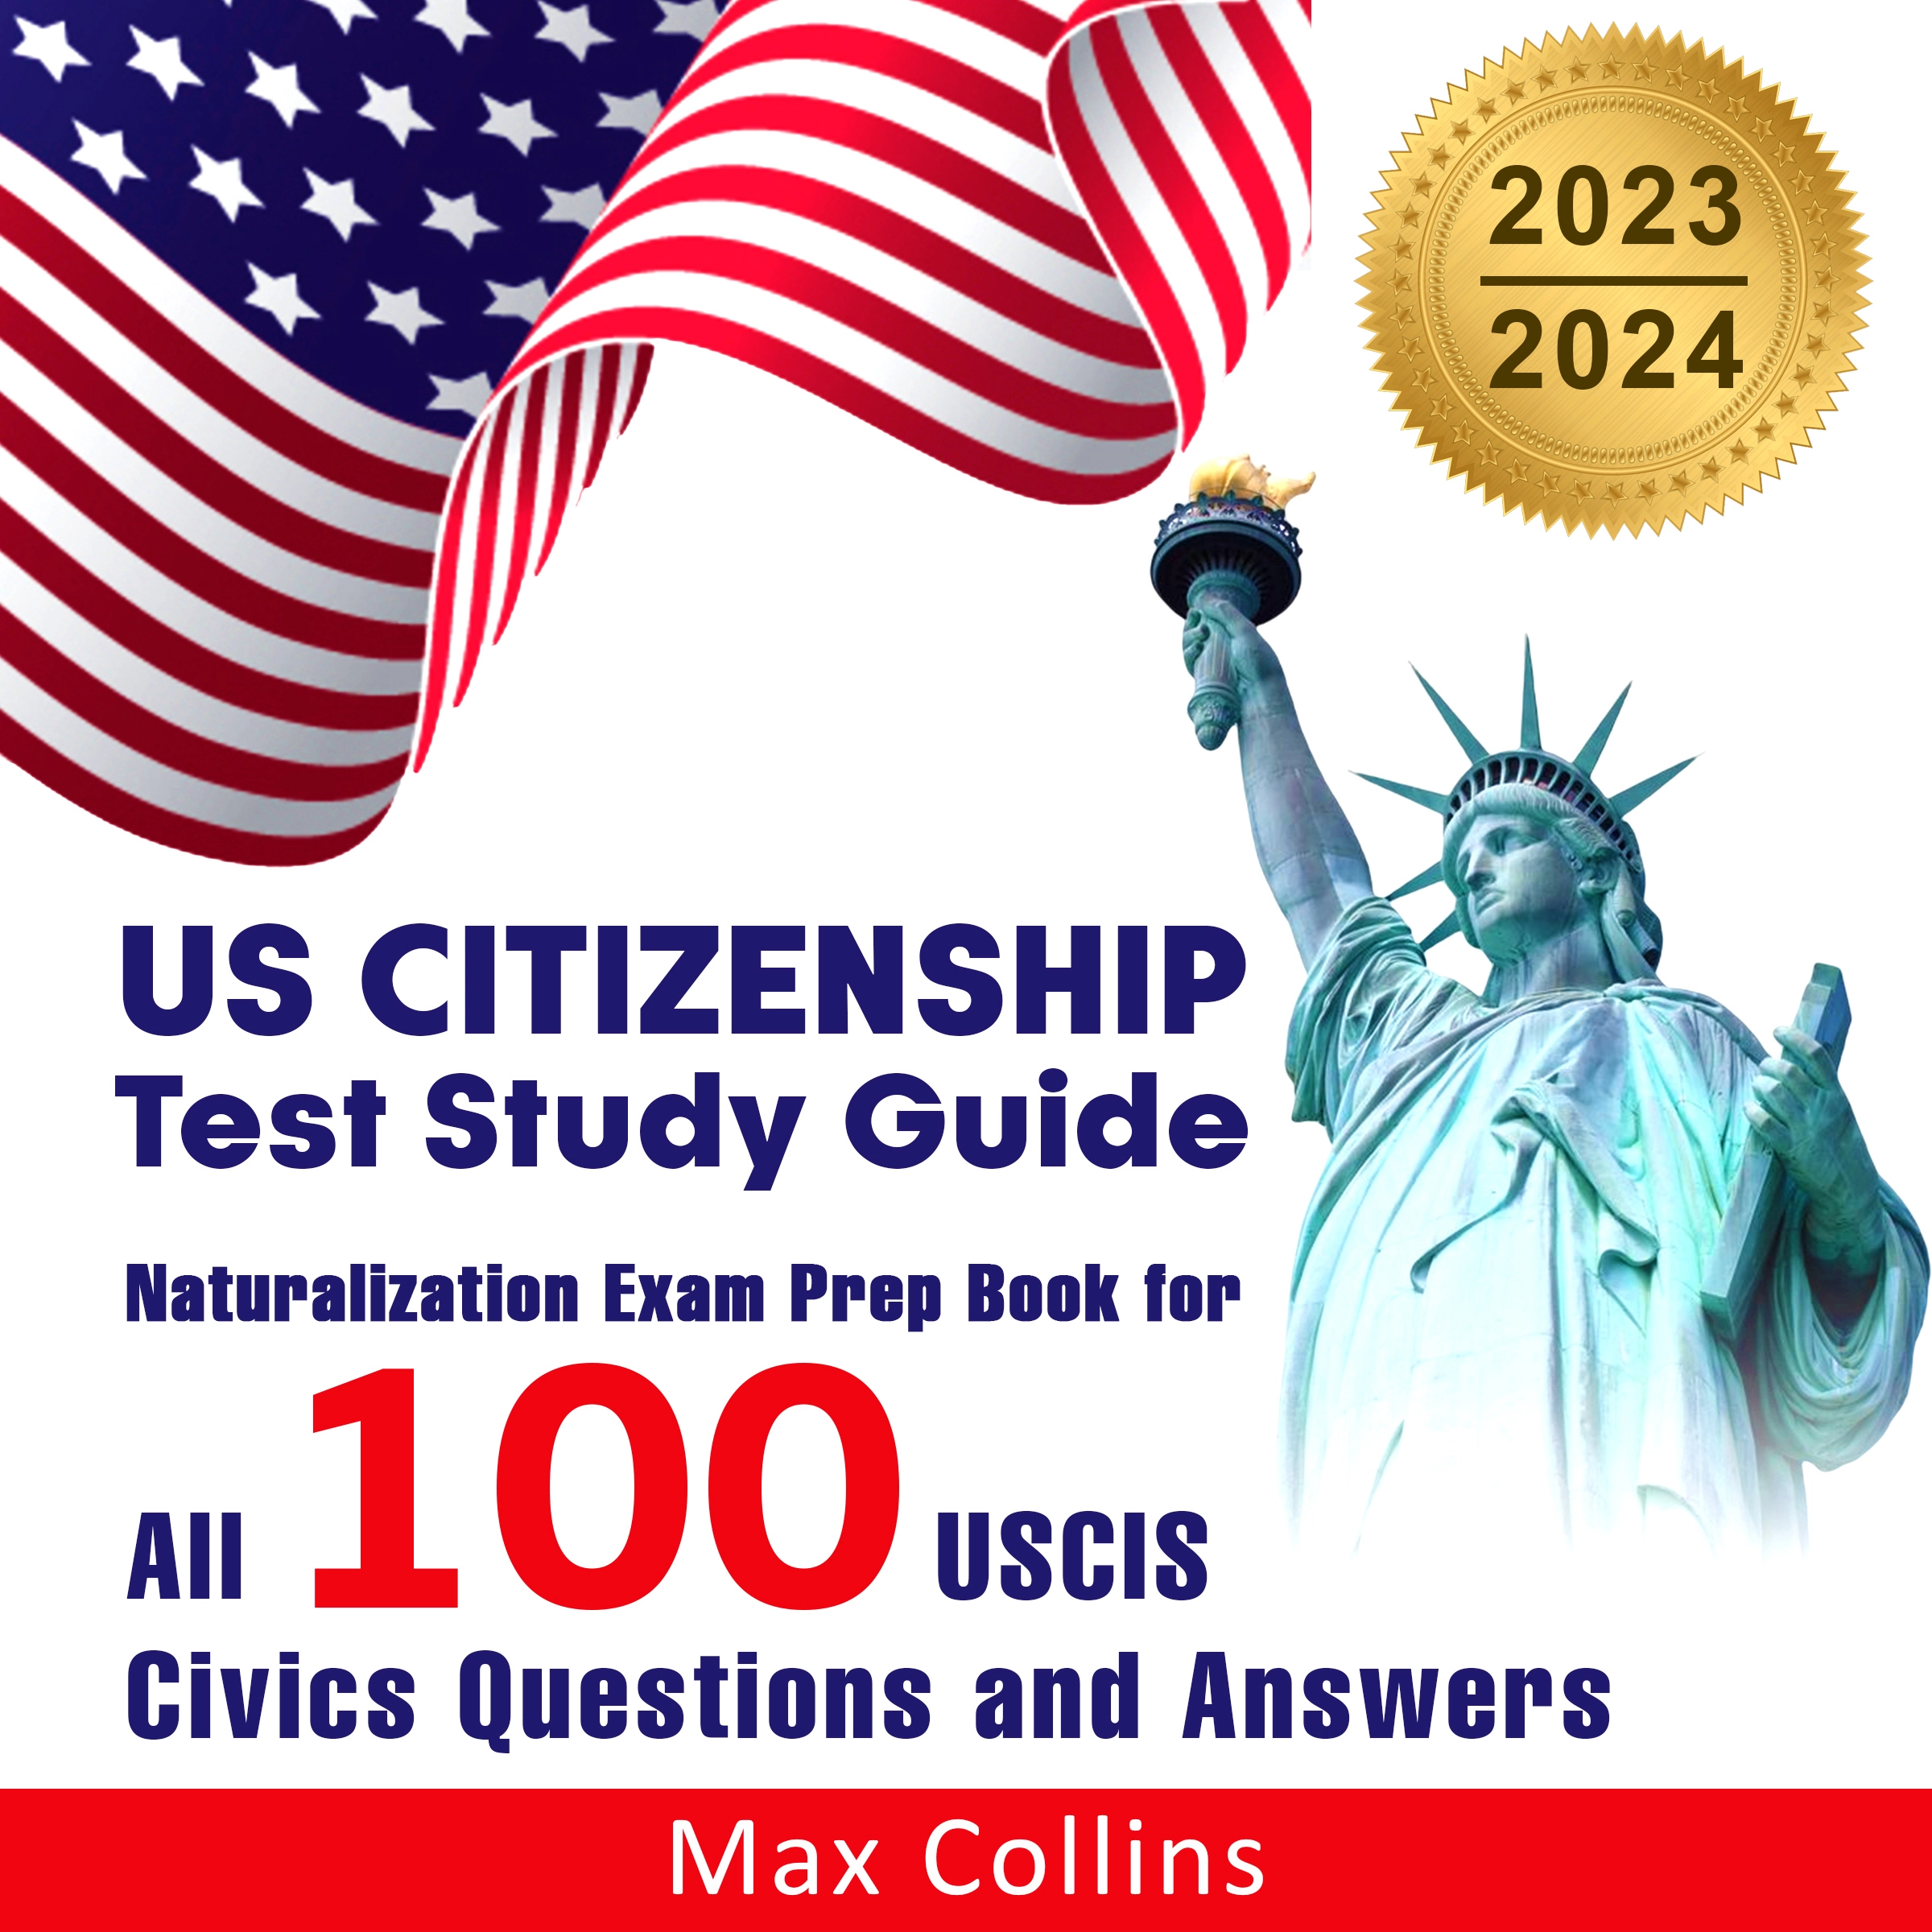 US Citizenship Test Study Guide 2023 and 2024 Audiobook by Max Collins